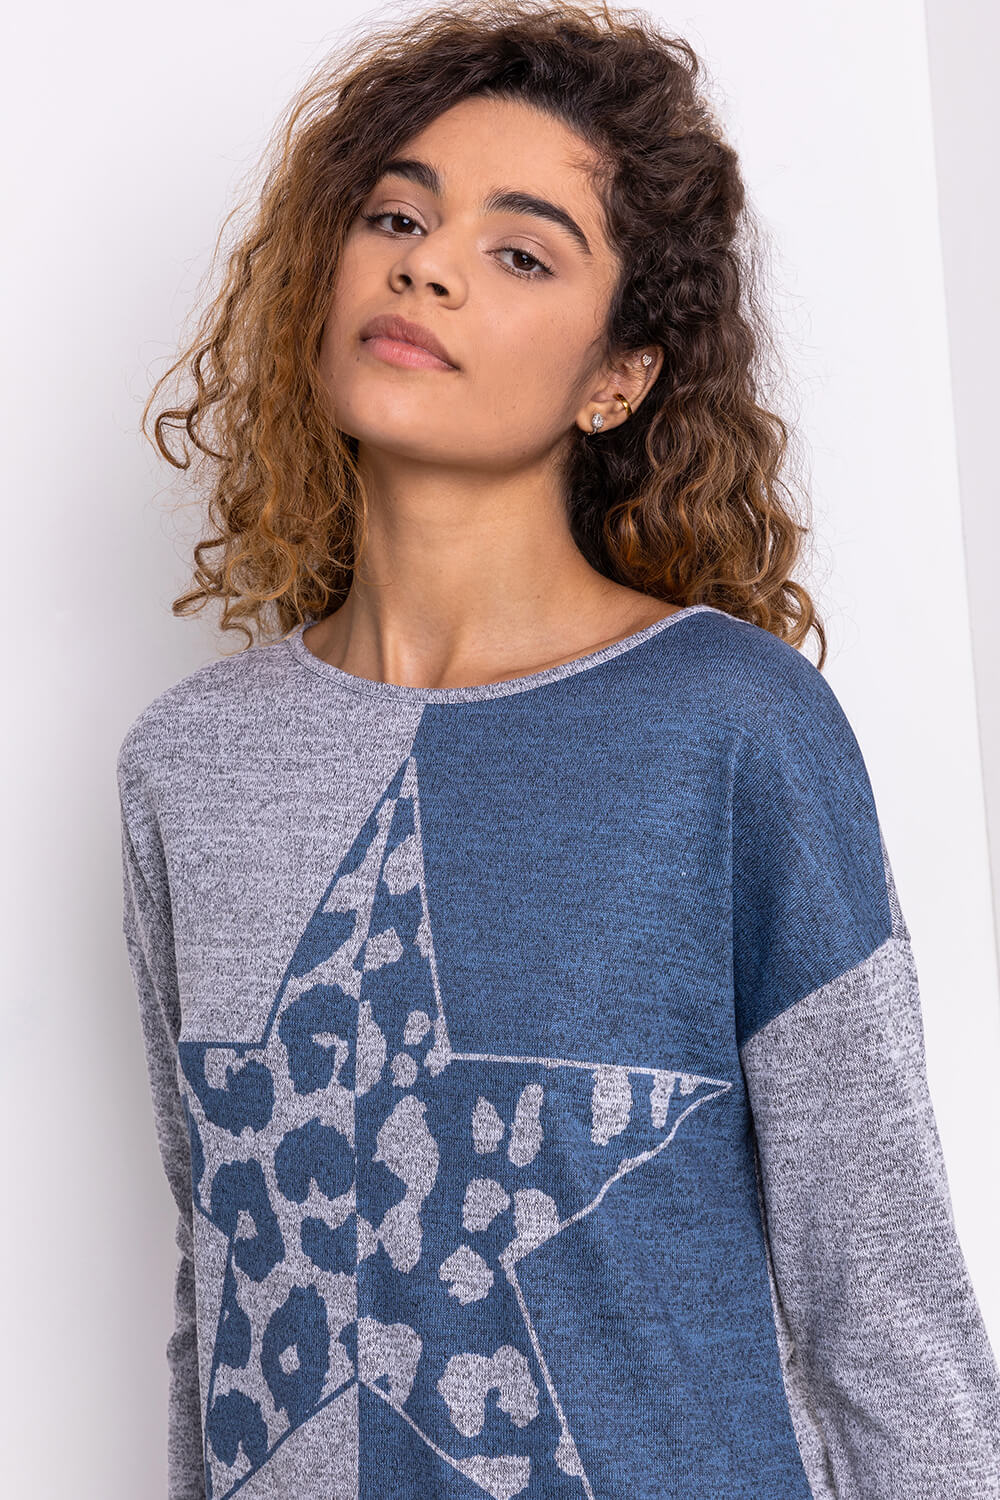 Blue Contrast Animal Print Soft Knit Jersey Top, Image 4 of 5